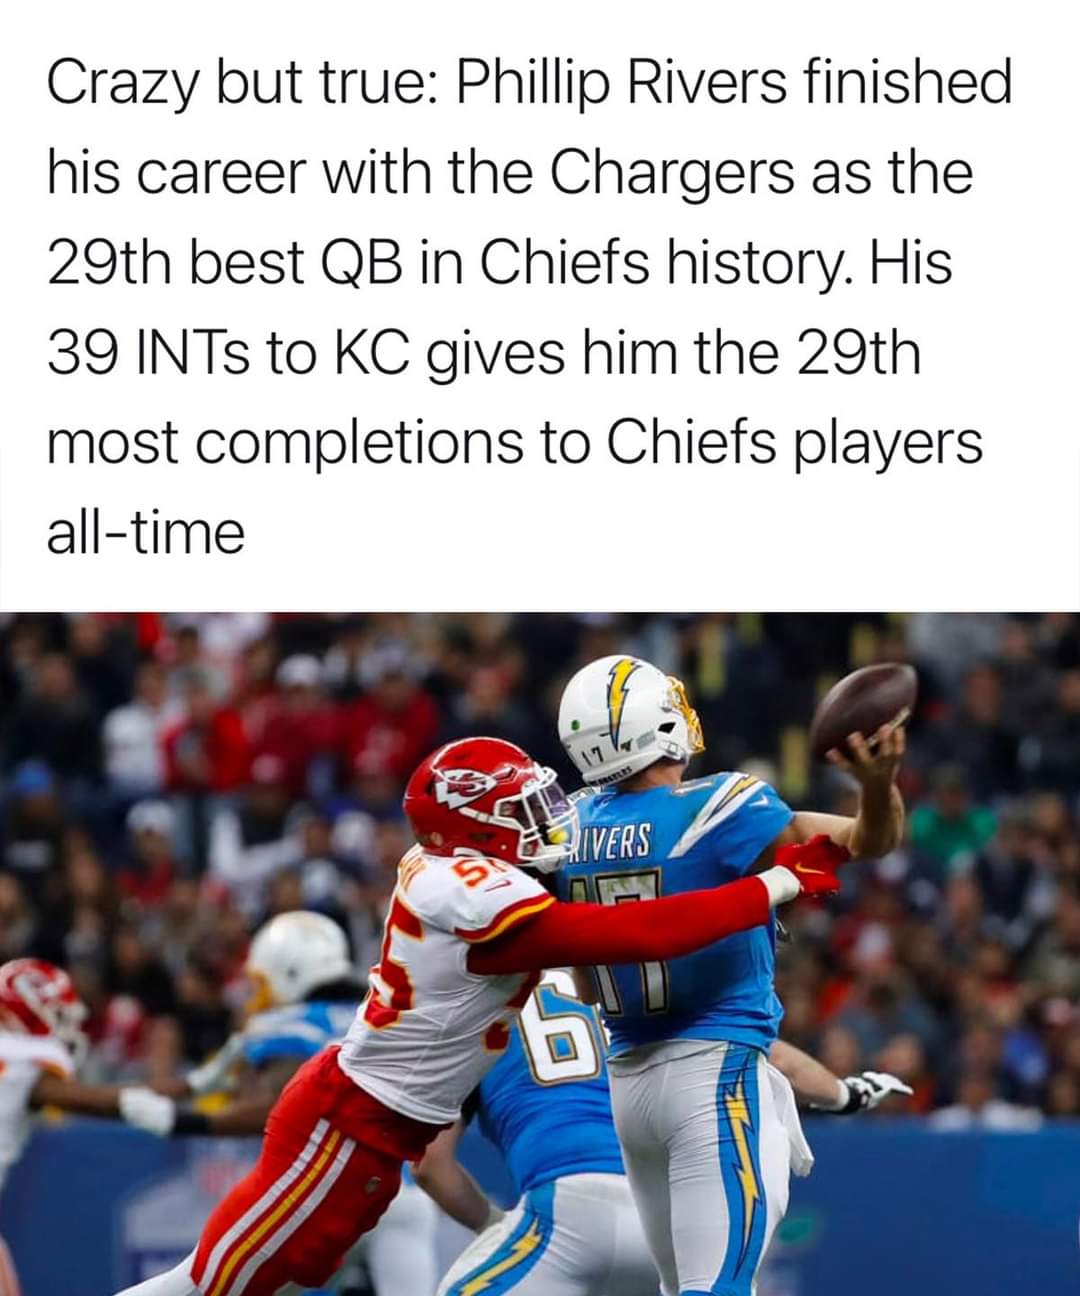 team sport - Crazy but true Phillip Rivers finished his career with the Chargers as the 29th best Qb in Chiefs history. His 39 INTs to Kc gives him the 29th most completions to Chiefs players alltime Ivers